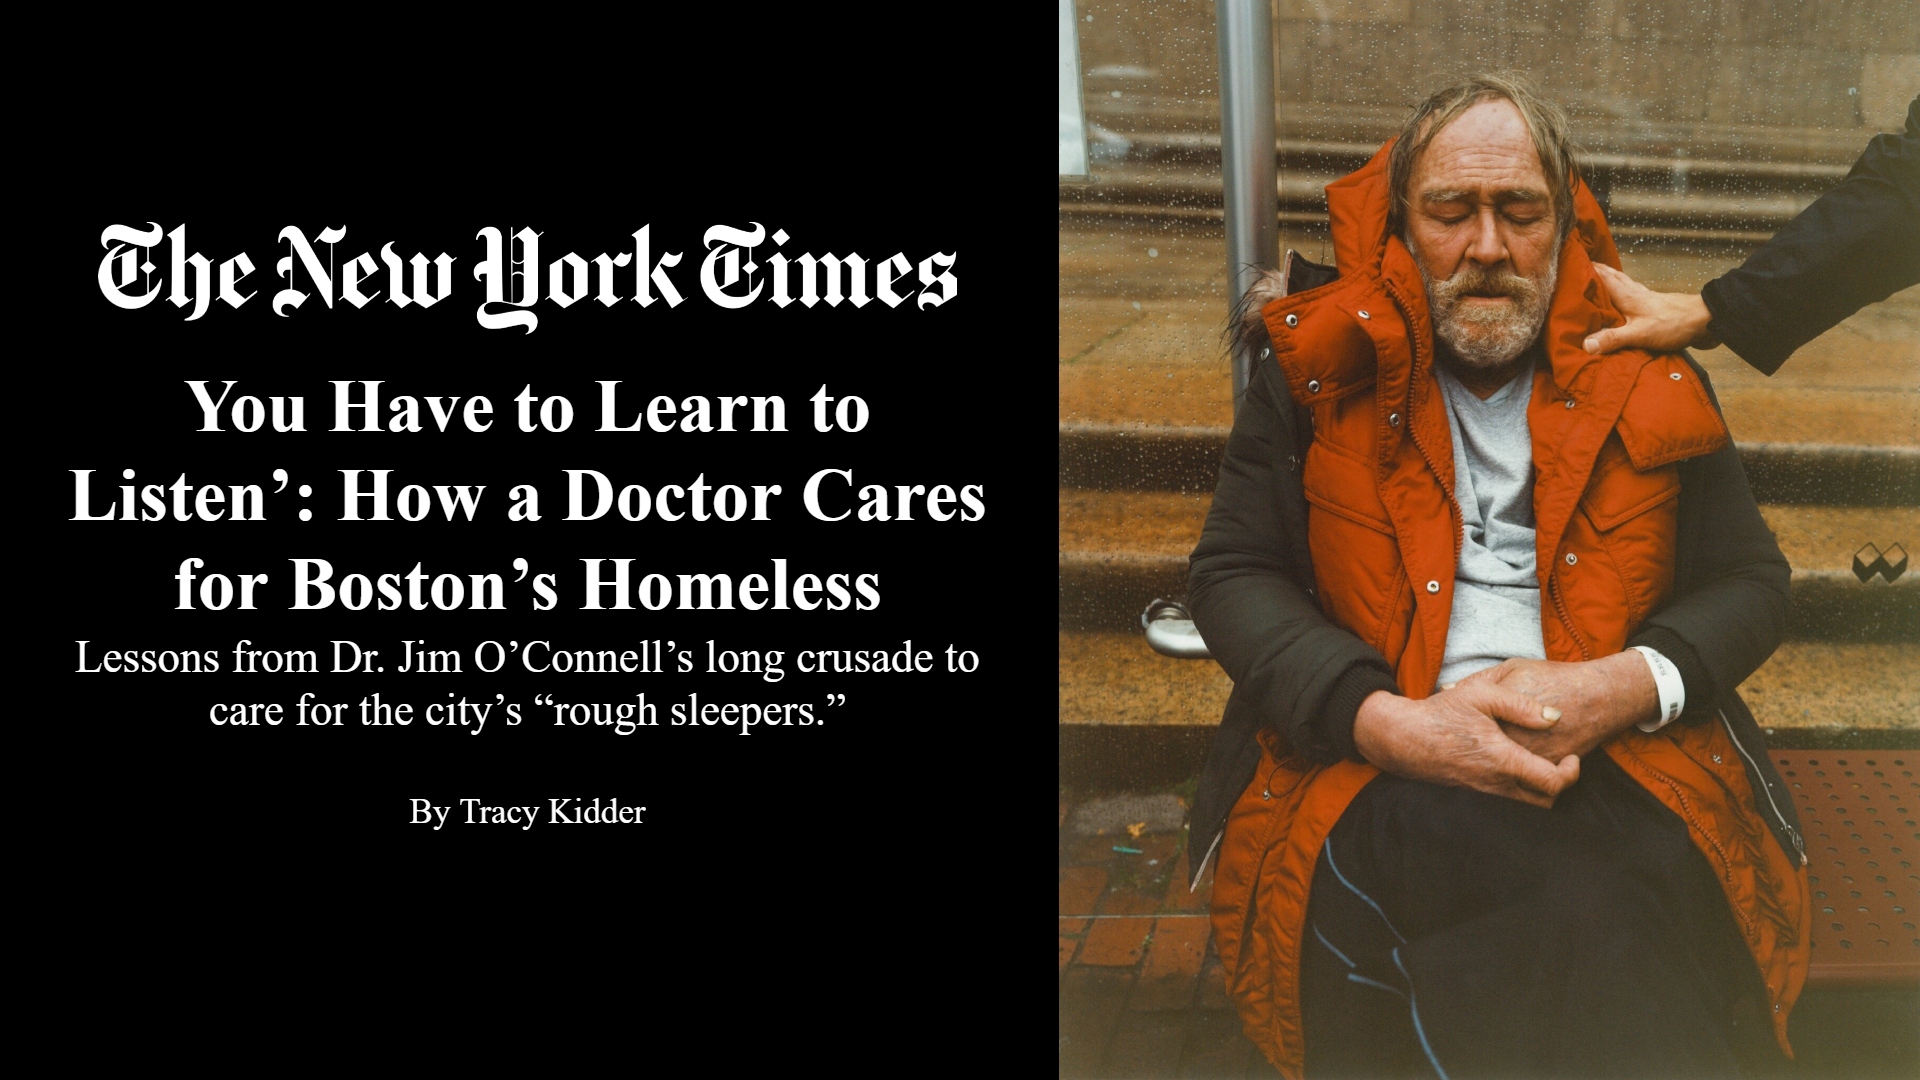 New York Times Magazine cover story by Tracy Kidder